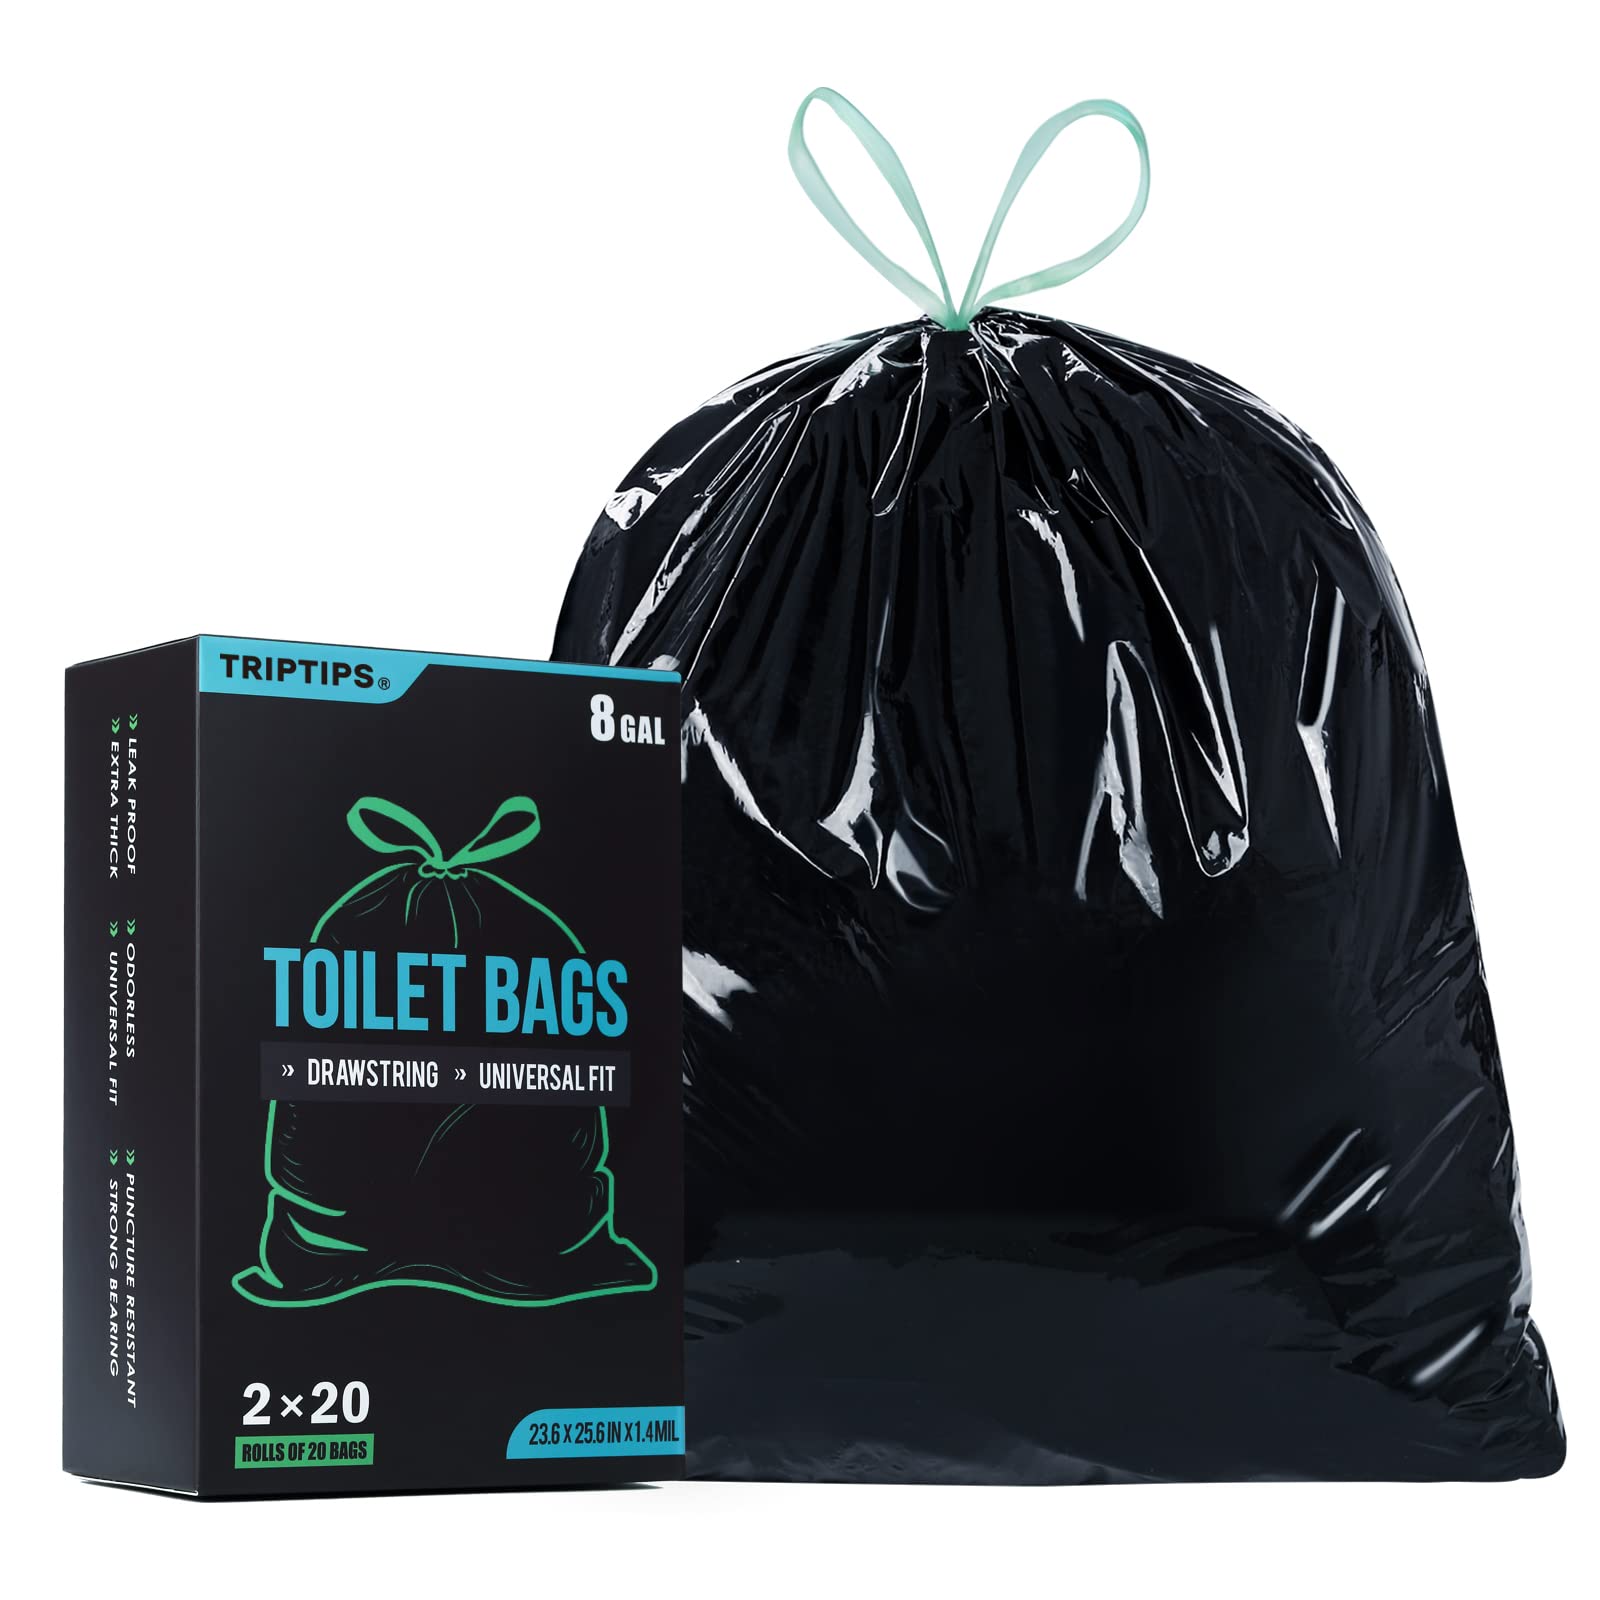 8 Gallon Trash Bags, 8 Gal Garbage Bag Can Liners